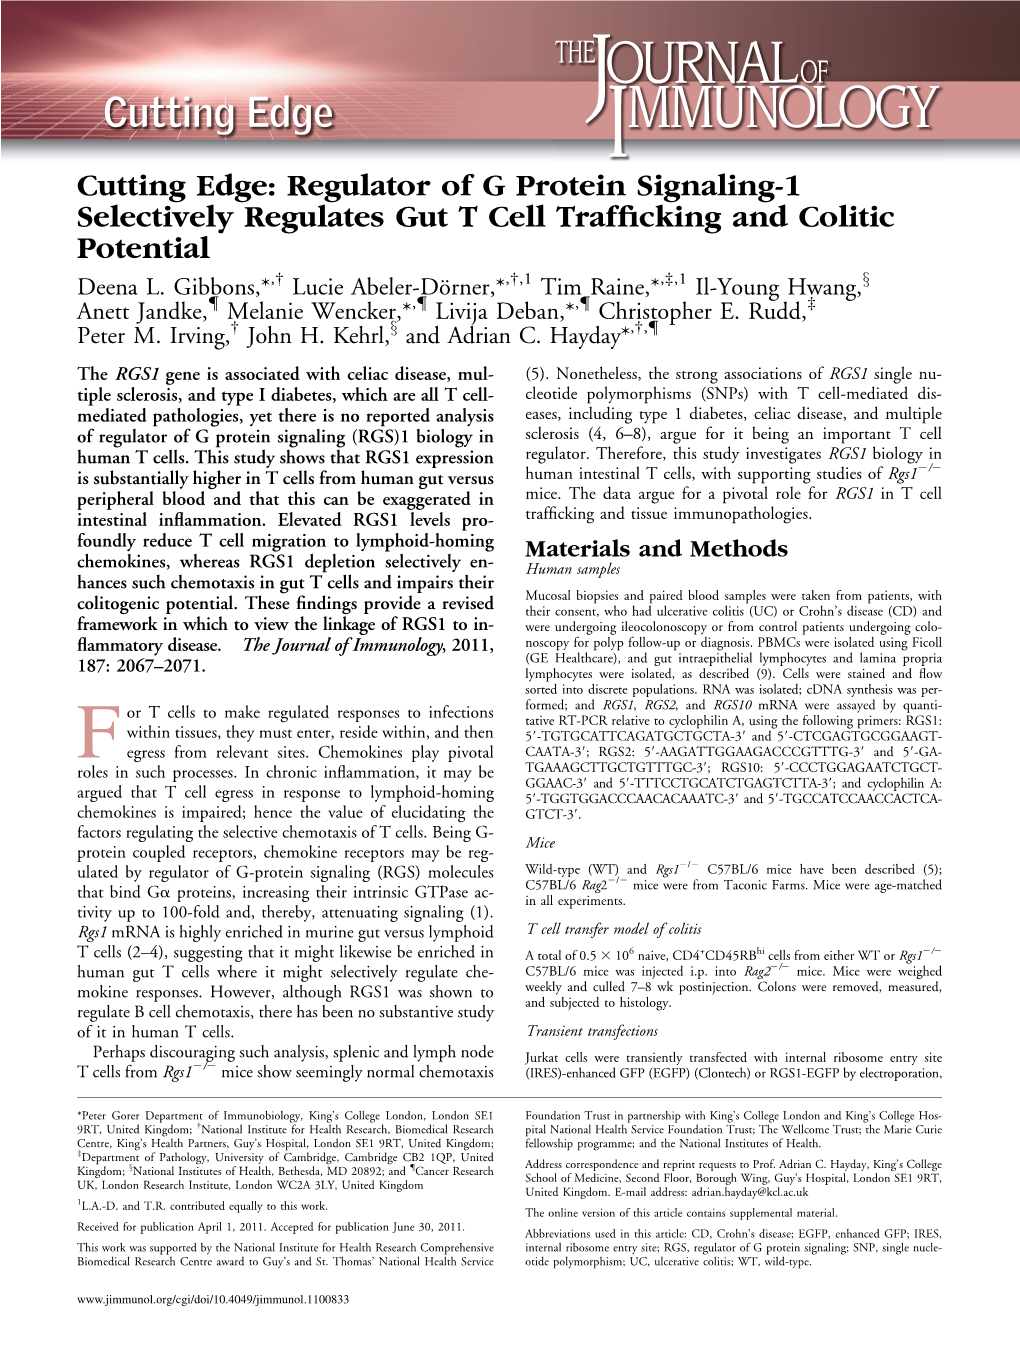 Regulator of G Protein Signaling-1 Selectively Regulates Gut T Cell Trafﬁcking and Colitic Potential X Deena L